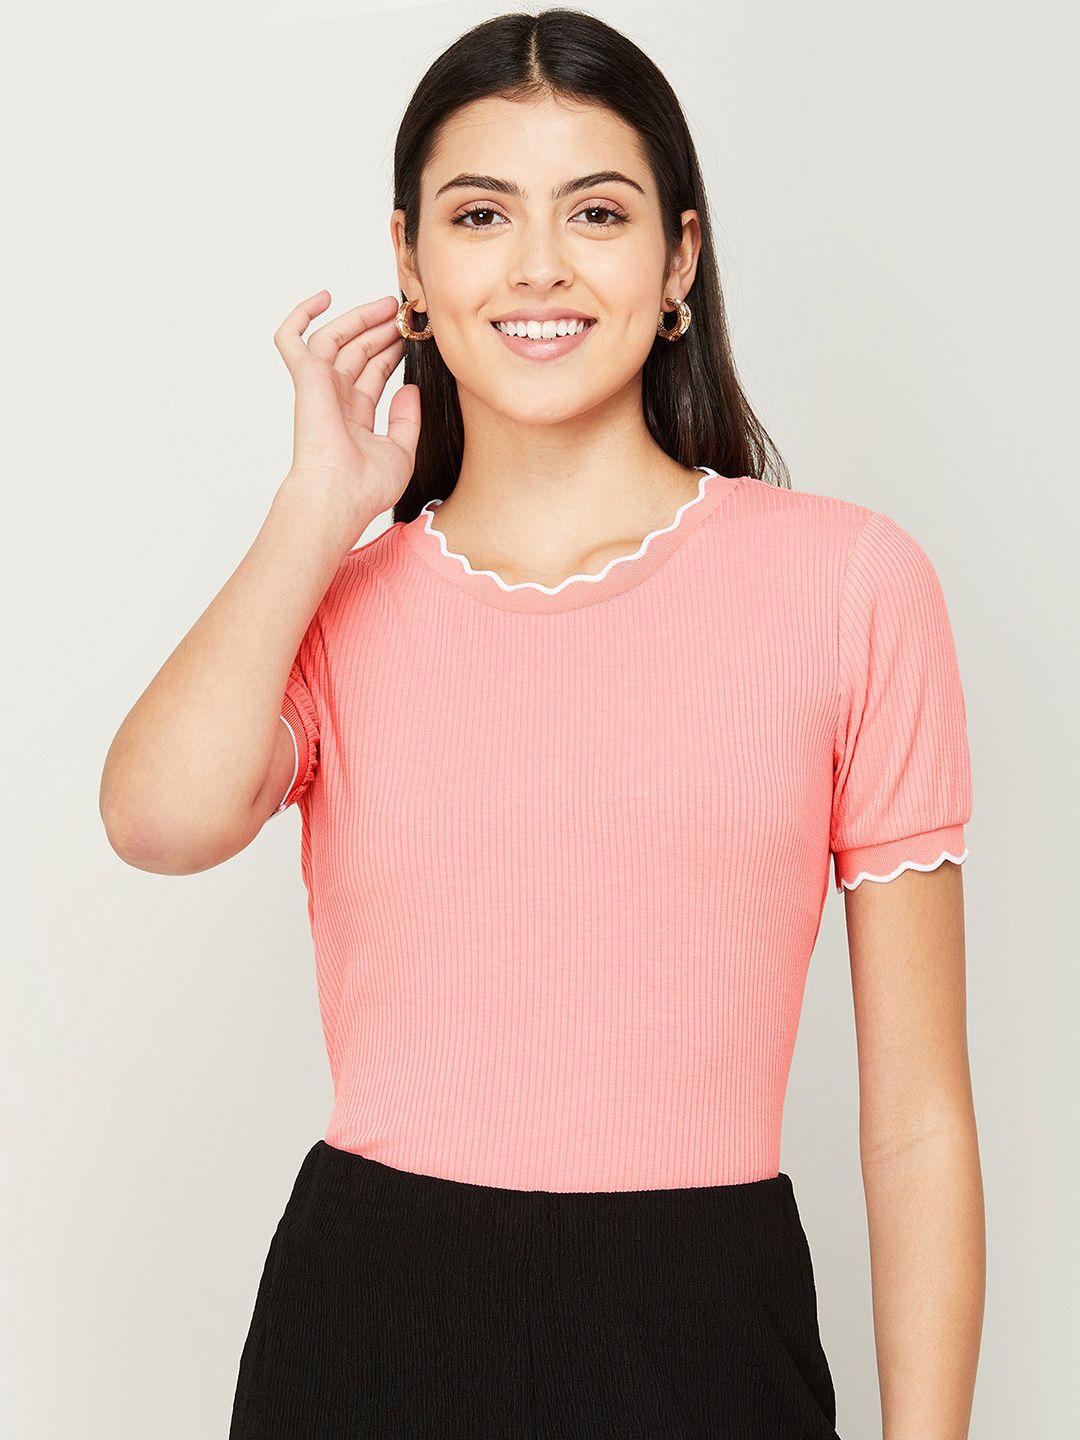 code by lifestyle striped top